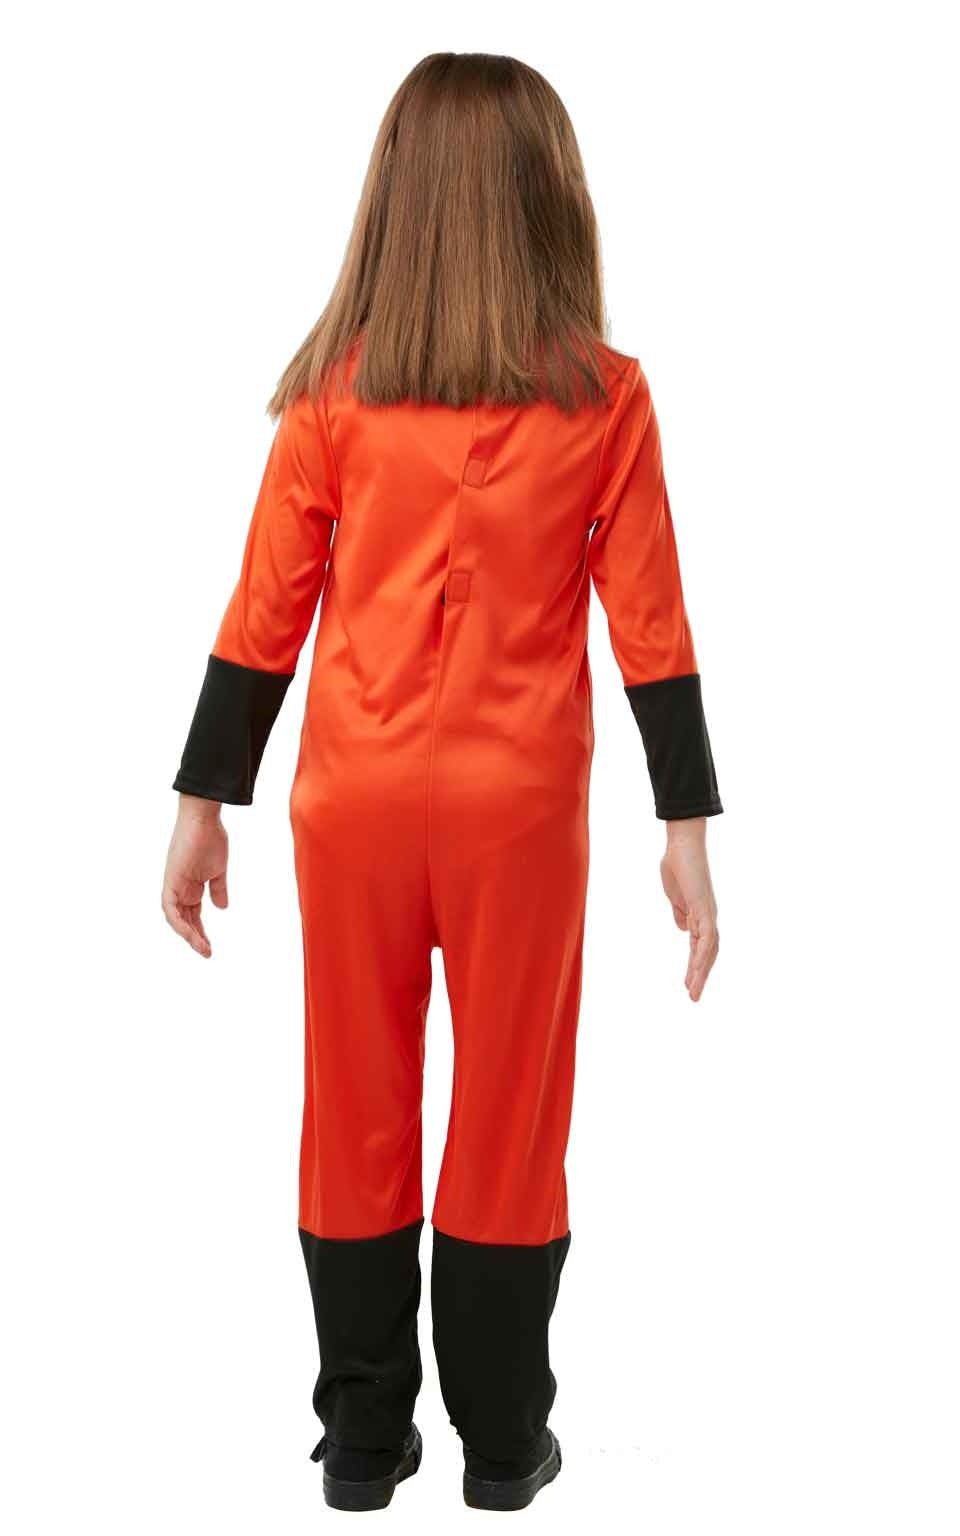 Child Incredibles 2 Costume_2